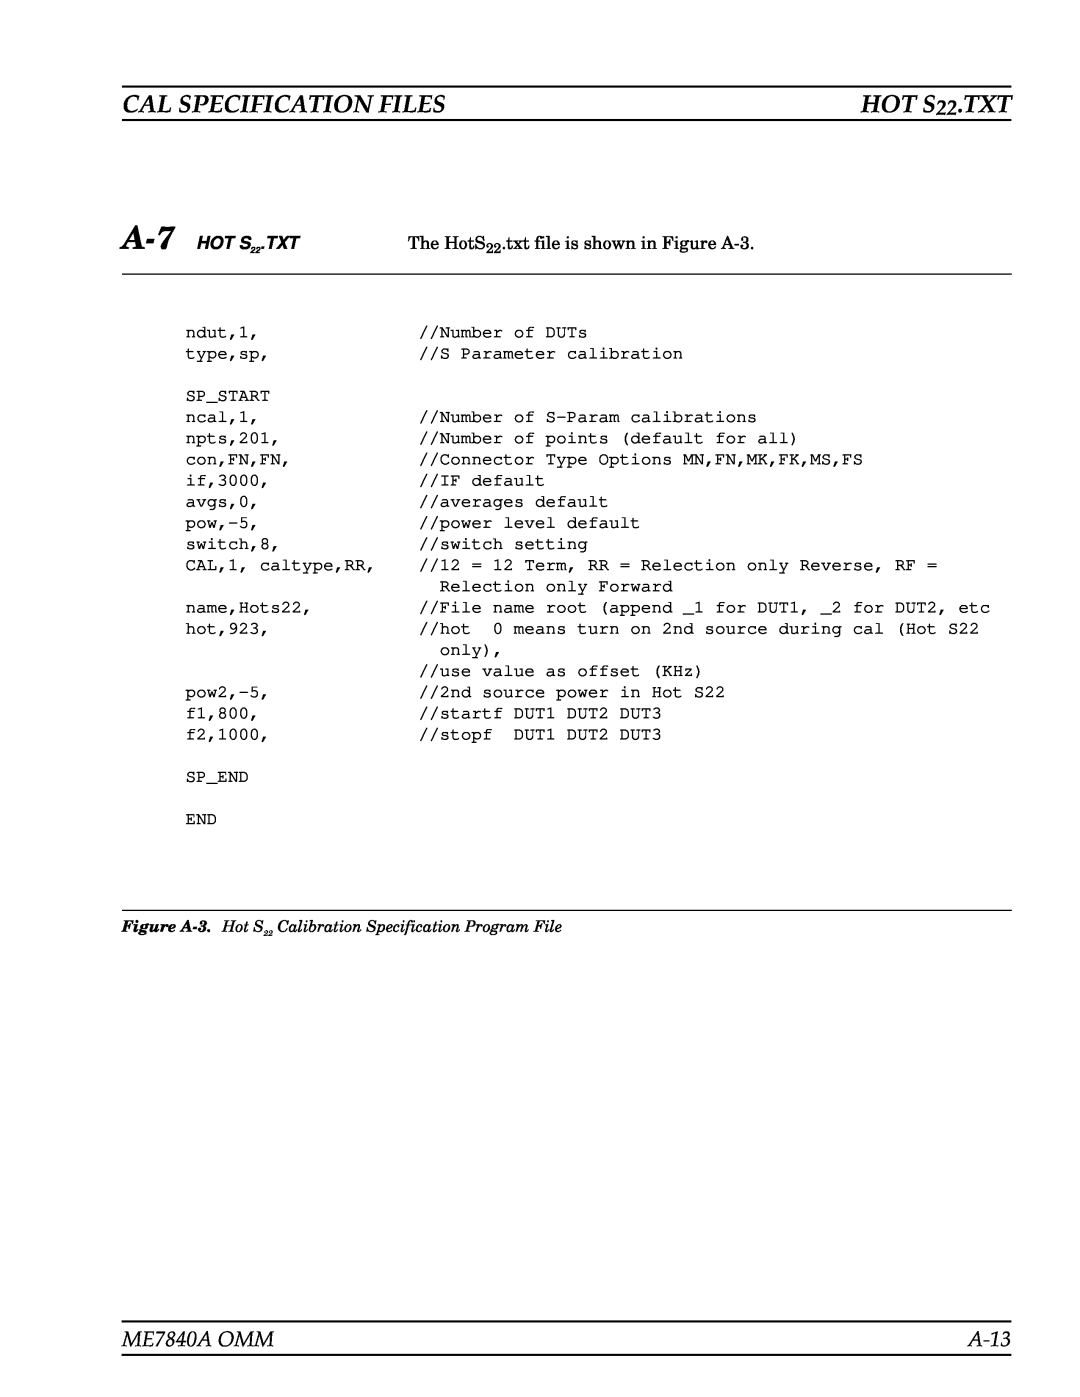 Anritsu manual A-13, Cal Specification Files, ME7840A OMM, A-7 HOT S22.TXT 